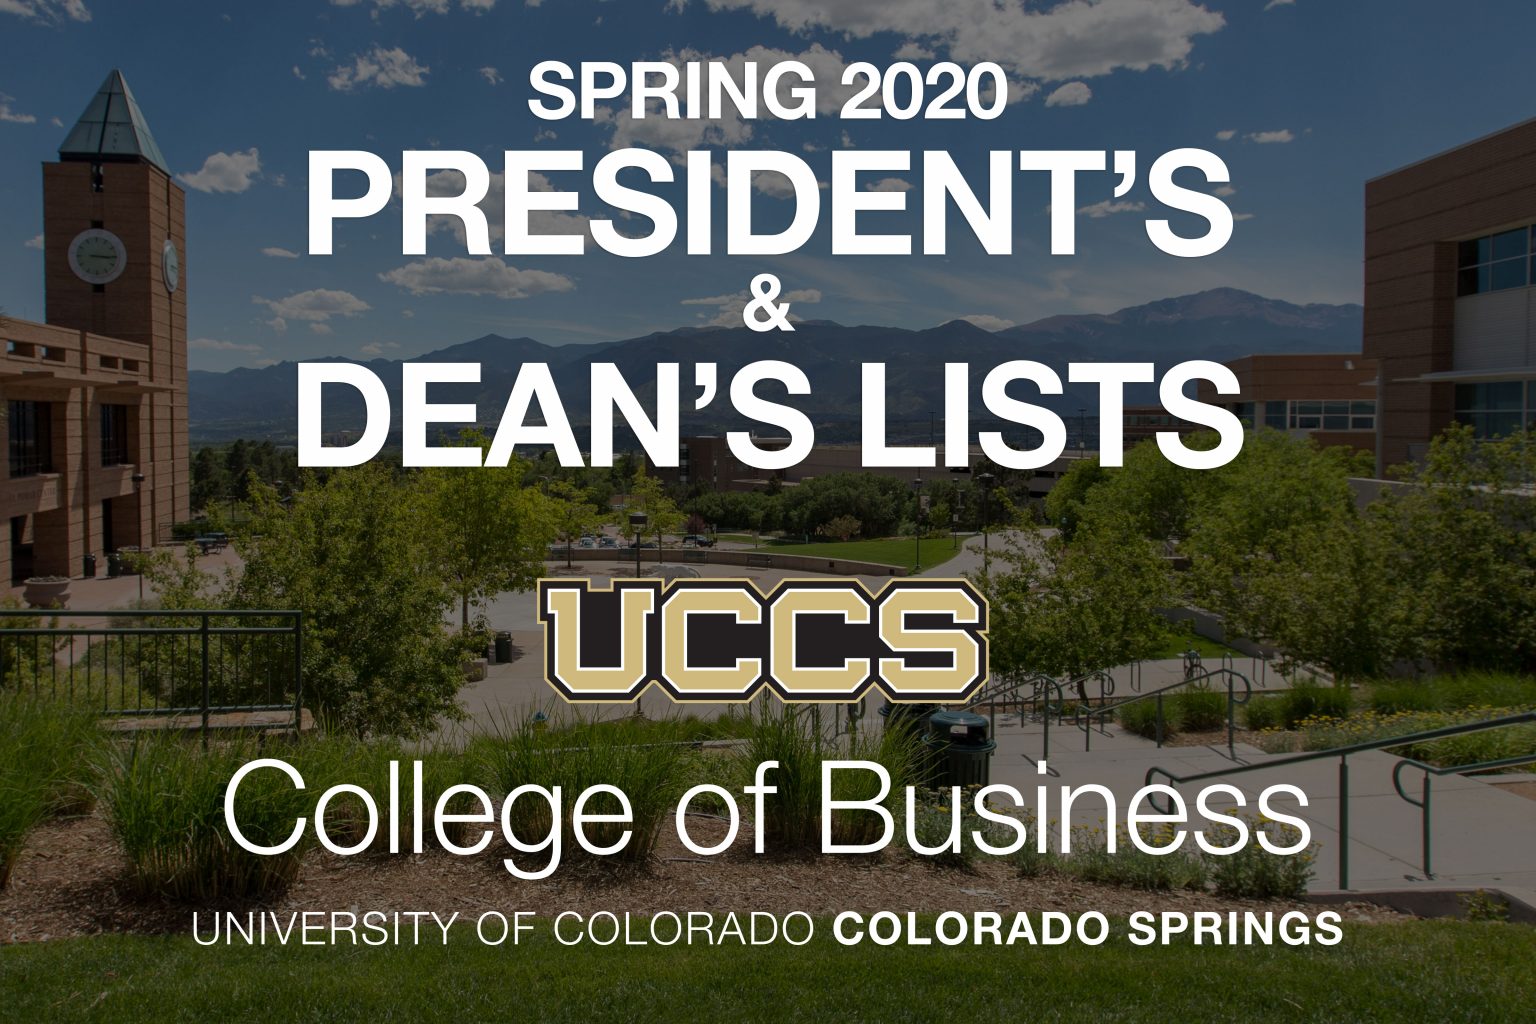 More than 250 students earn President’s and Dean’s List in College of